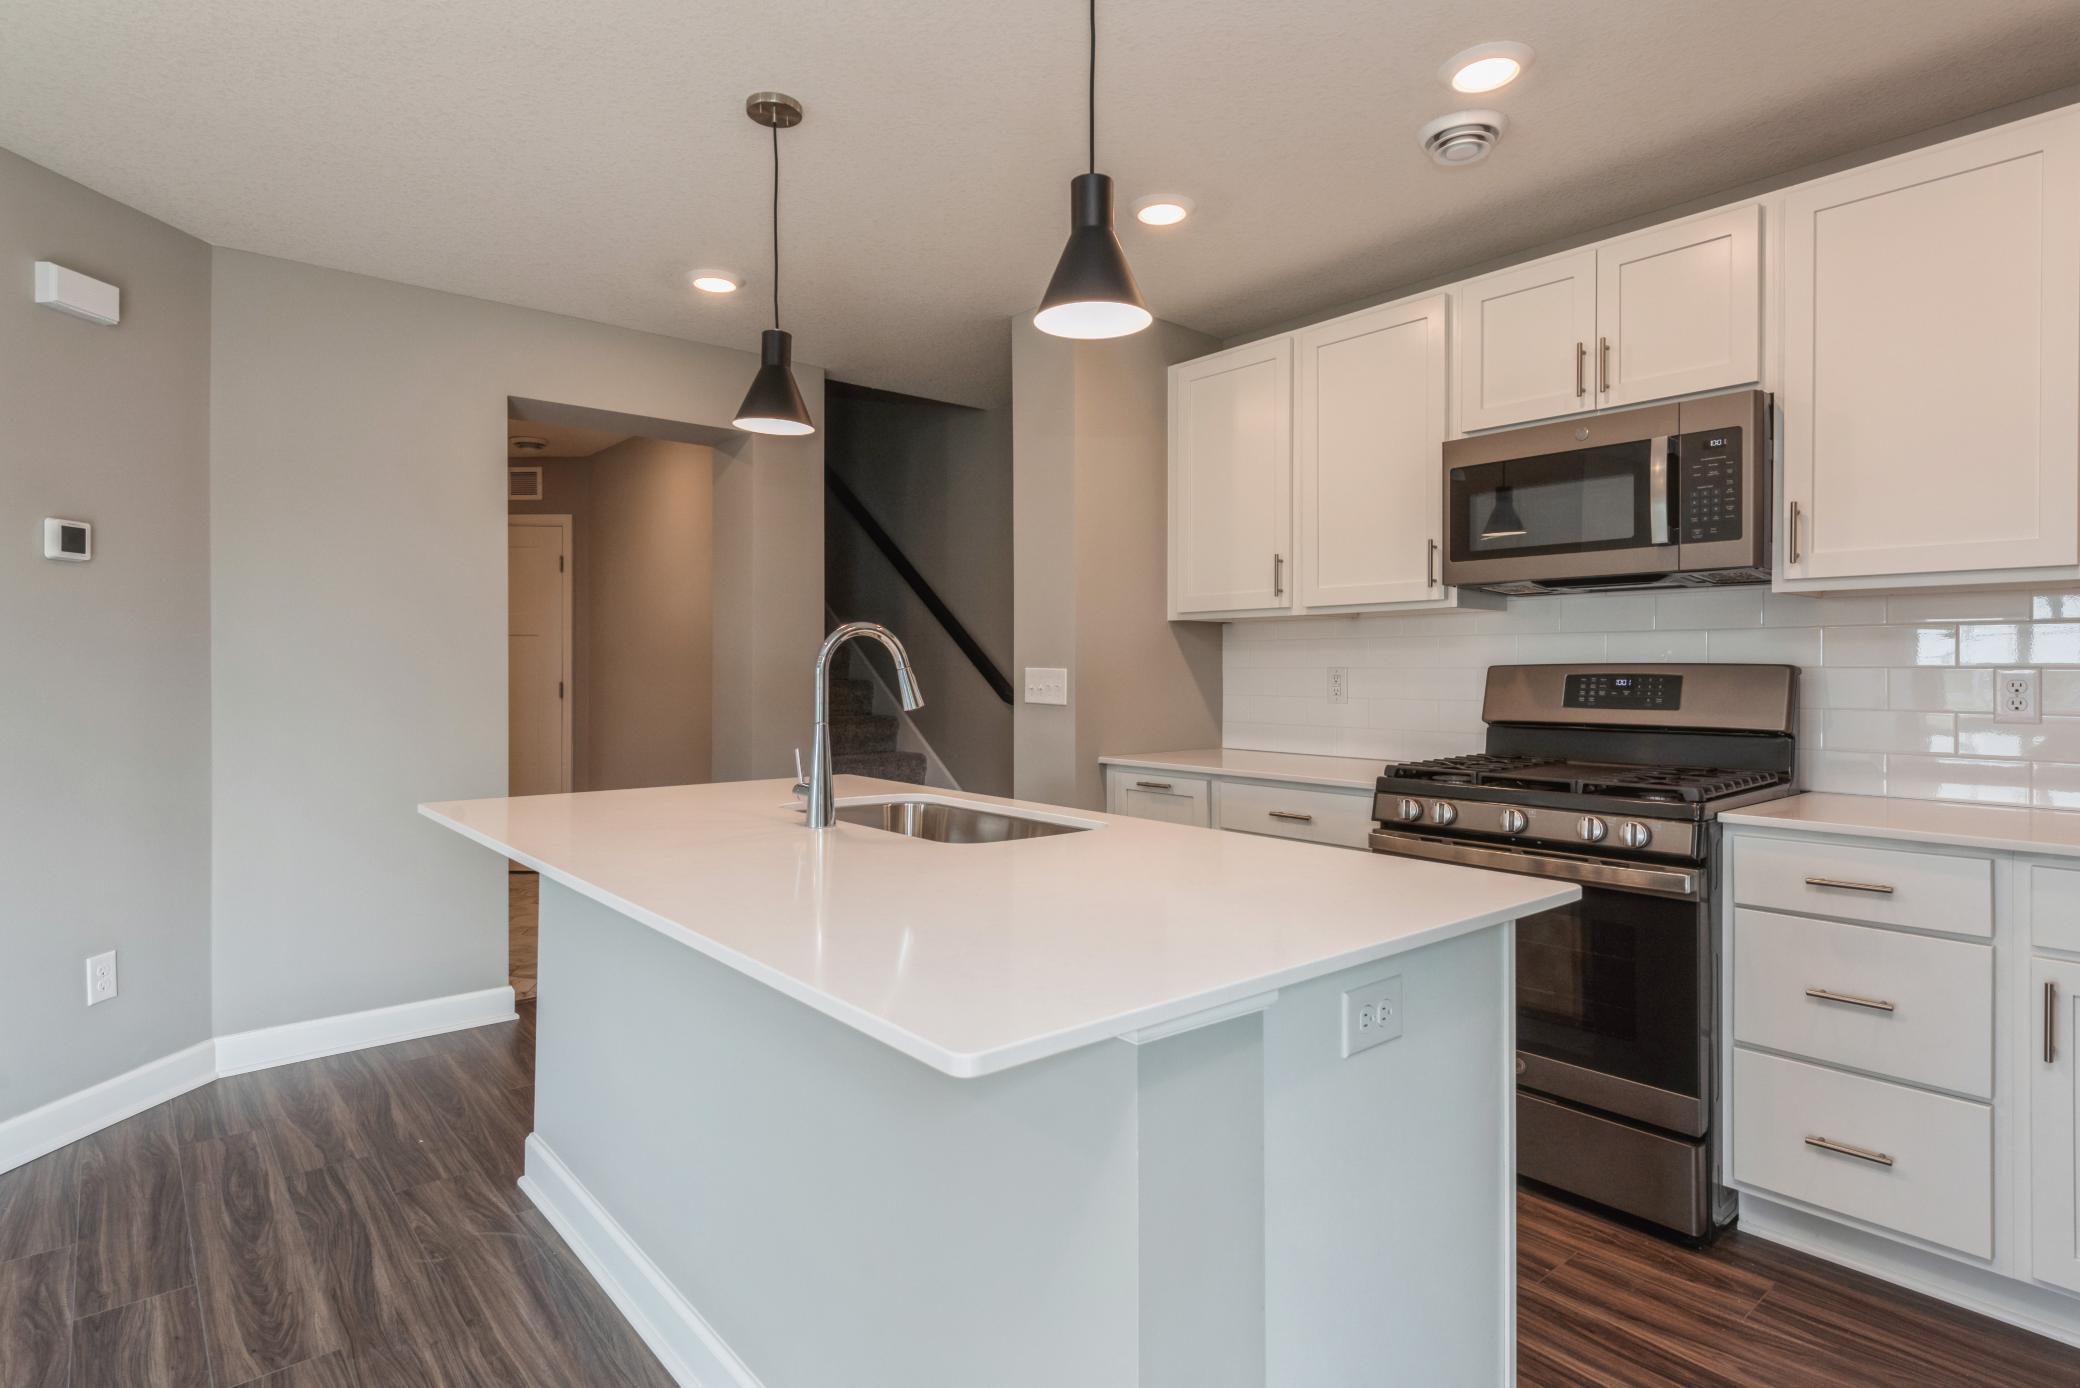 Welcome to Weston Commons! This stunning Franklin end unit is available for a May completion! *Photos are of another home, colors and finishes will vary.